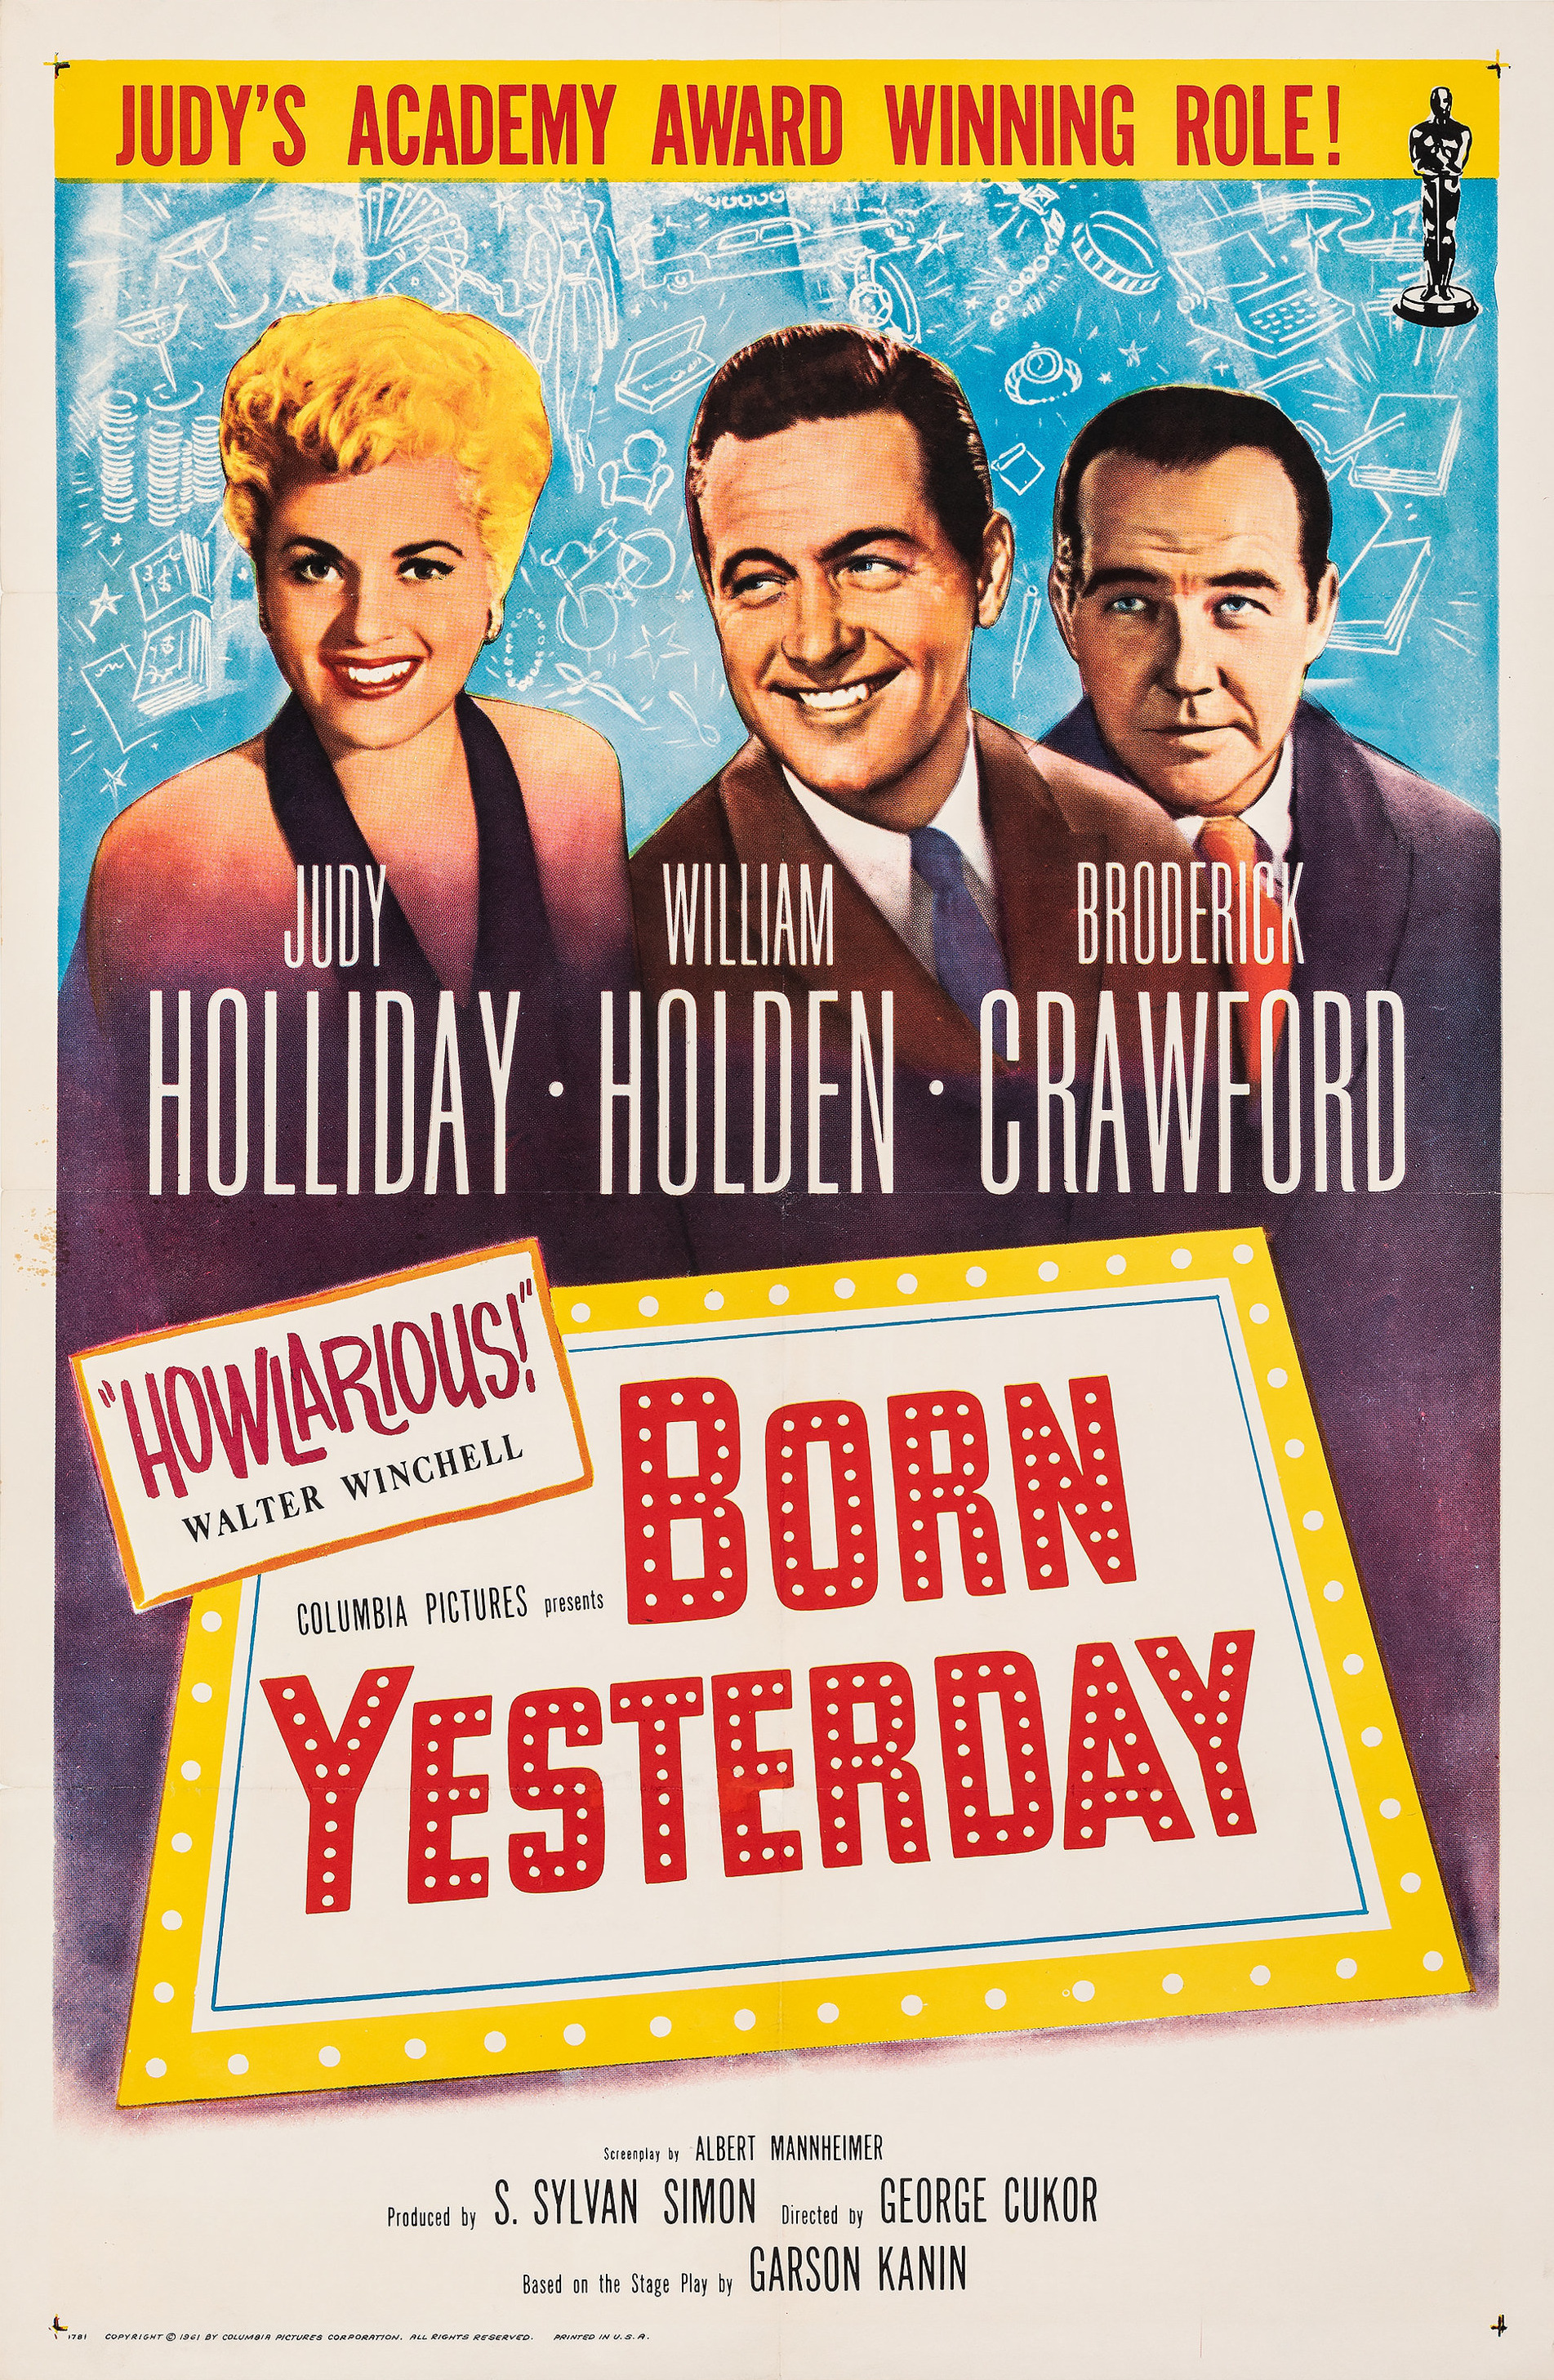 Mega Sized Movie Poster Image for Born Yesterday 